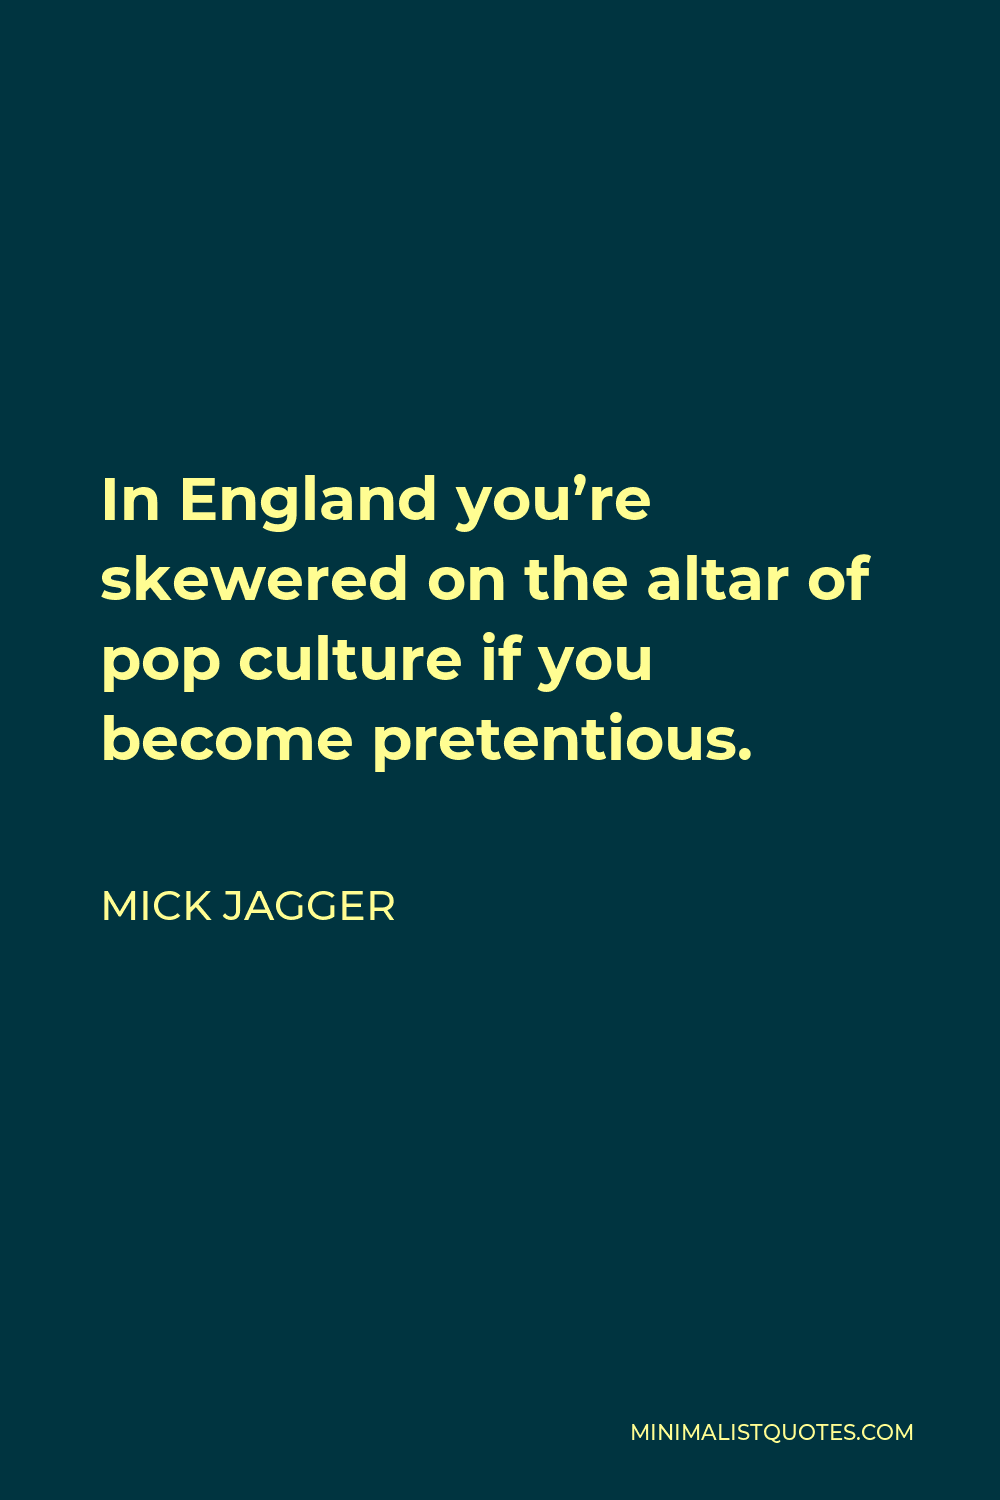 Mick Jagger Quote - In England you’re skewered on the altar of pop culture if you become pretentious.